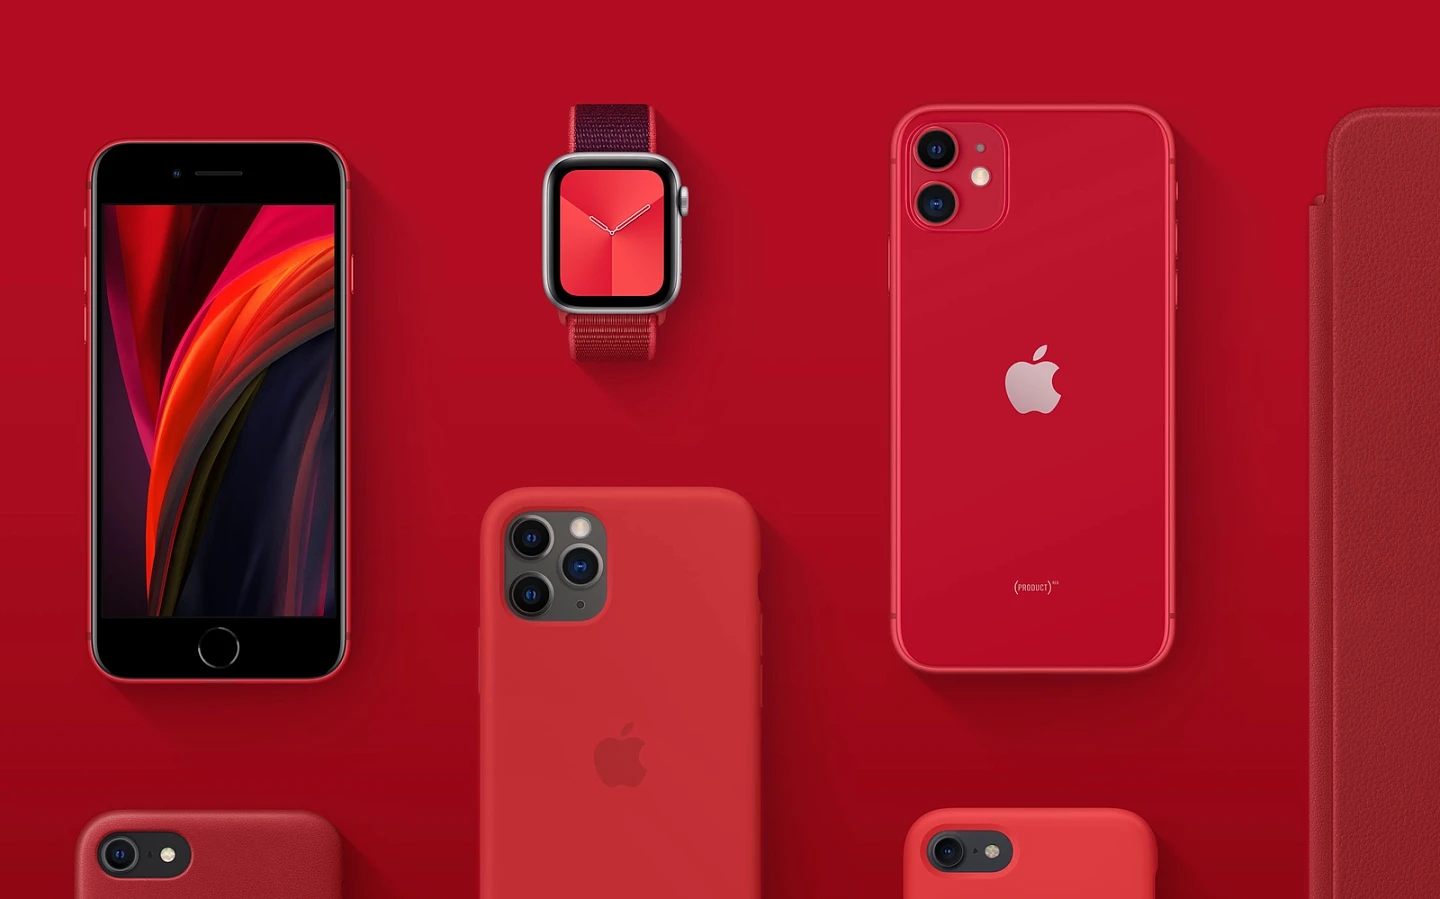 productred-apple-products.webp